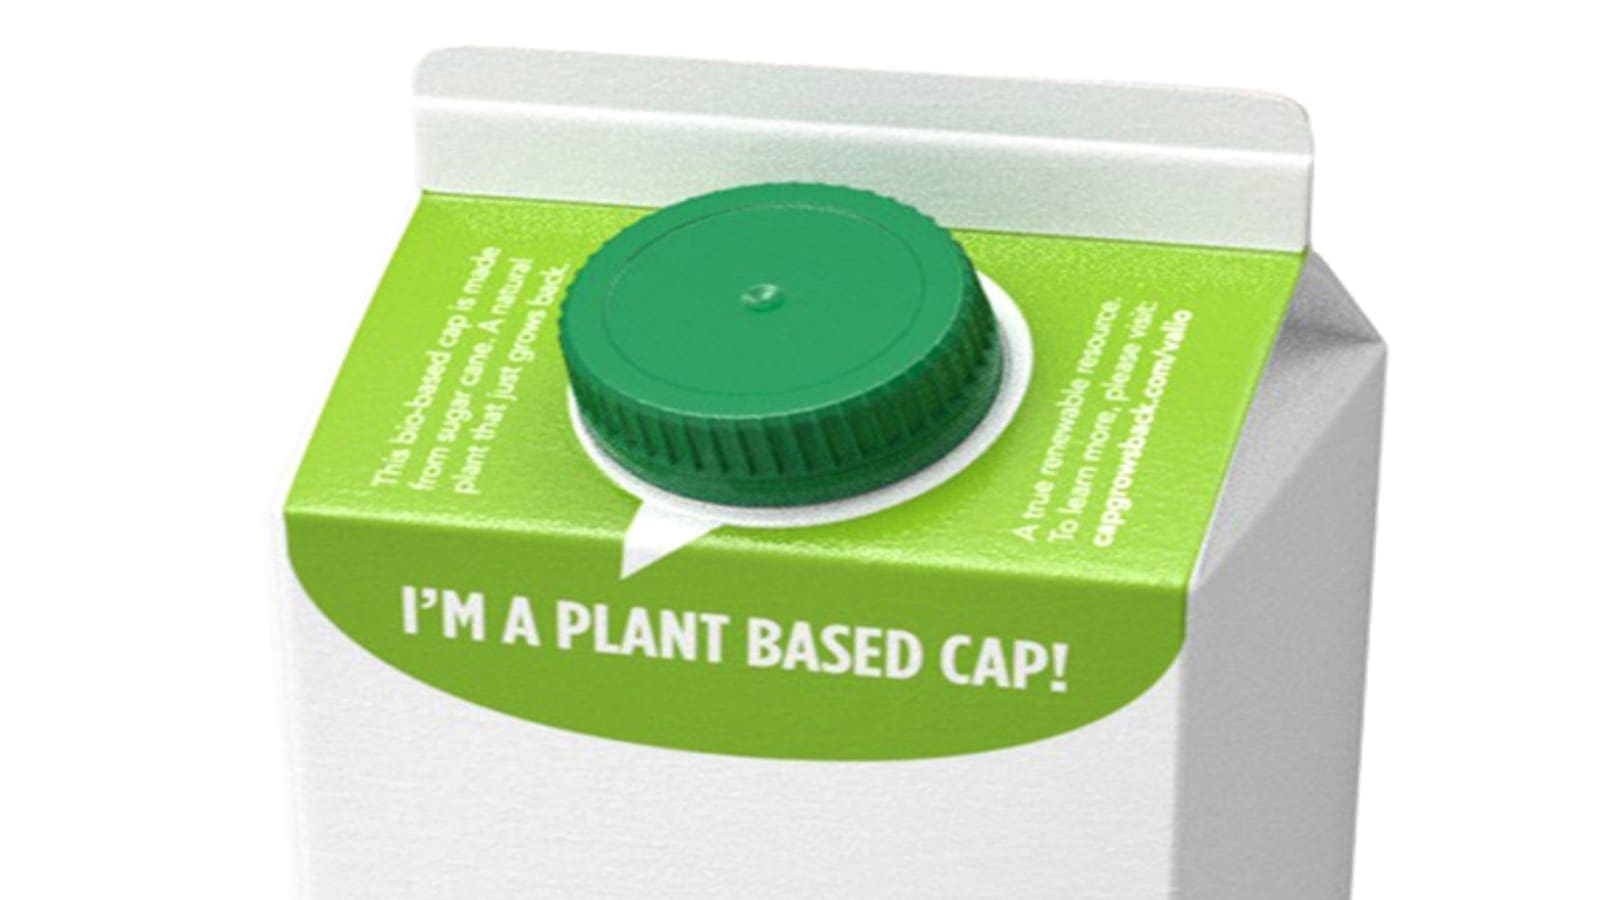 Tetra Pak debuts plant-based tethered cap solutions to help consumers reduce environmental waste